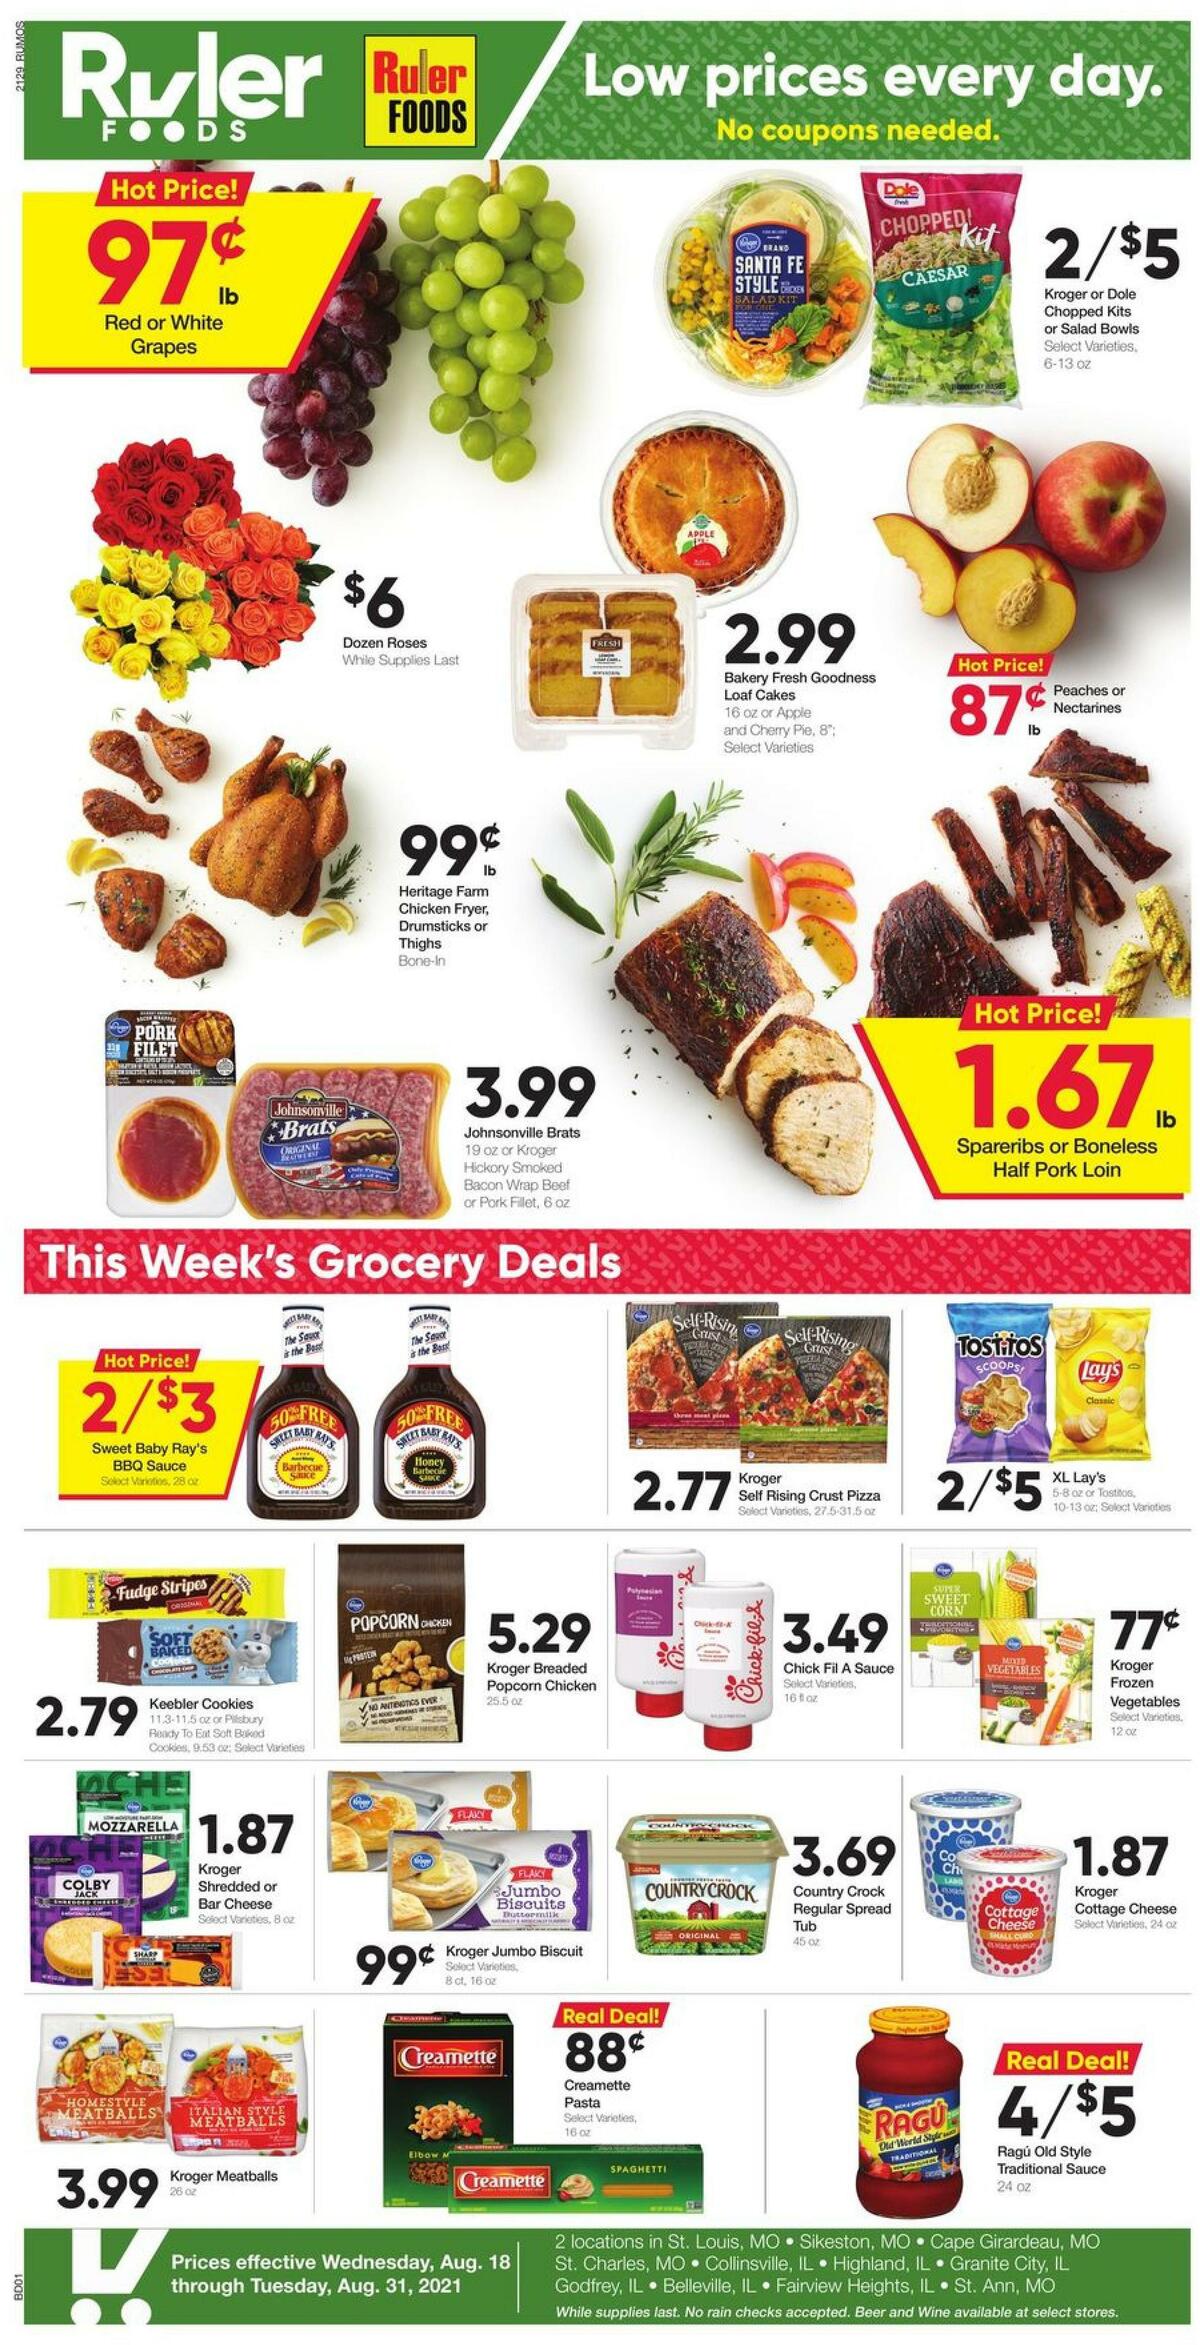 Ruler Foods Weekly Ad from August 18